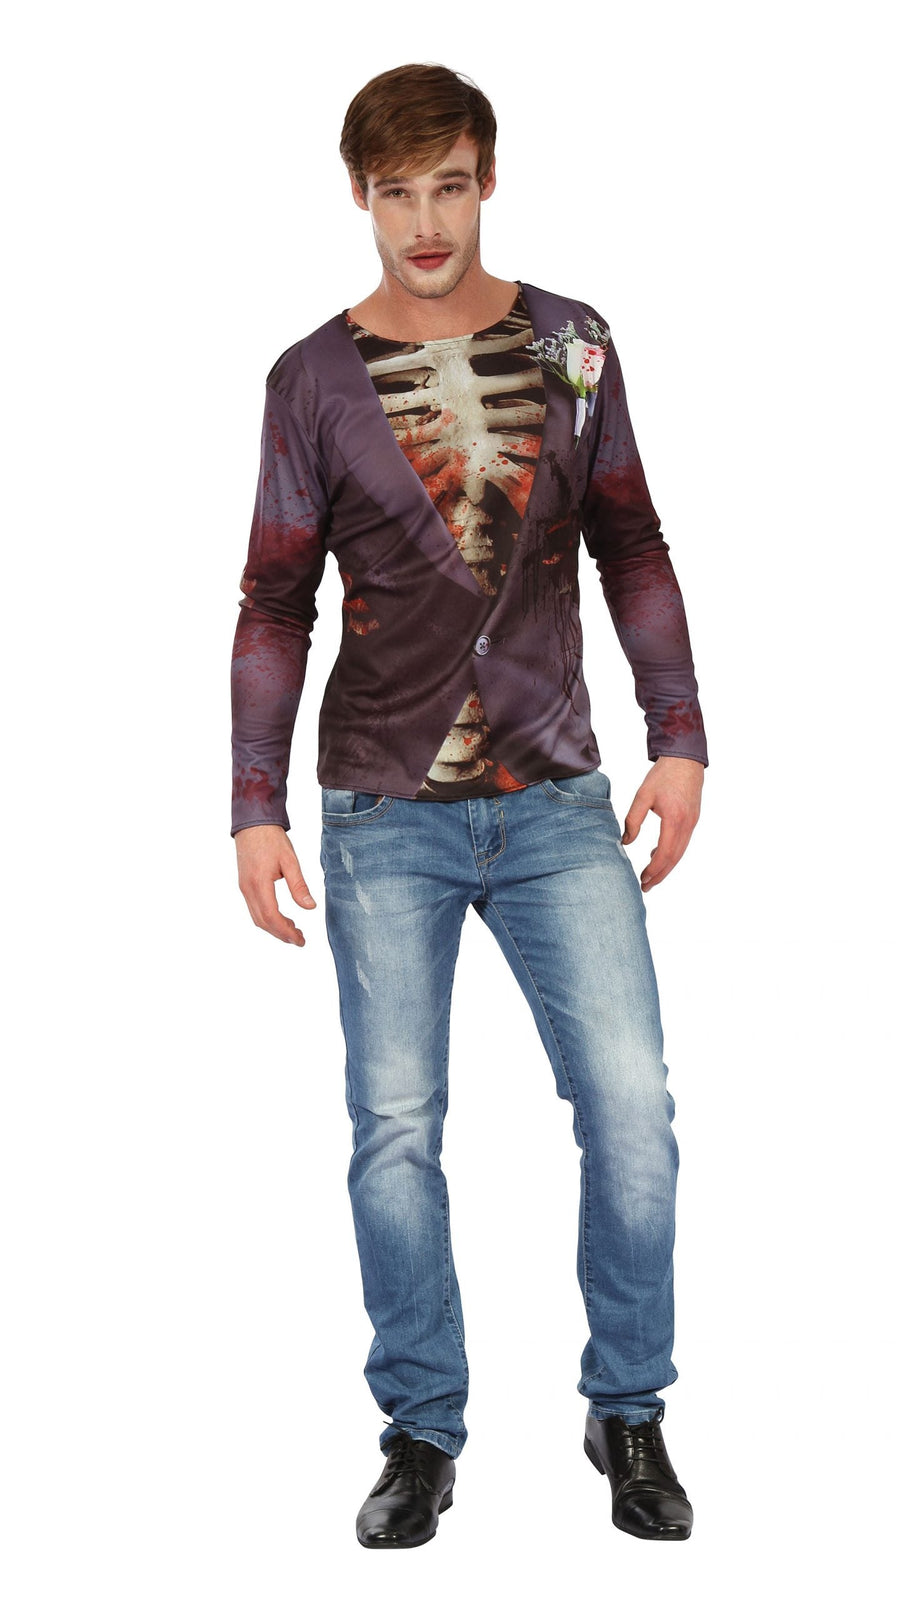 Zombie Bridegroom 3d Print- Shirt Adult Costume Male Chest Size 44"_1